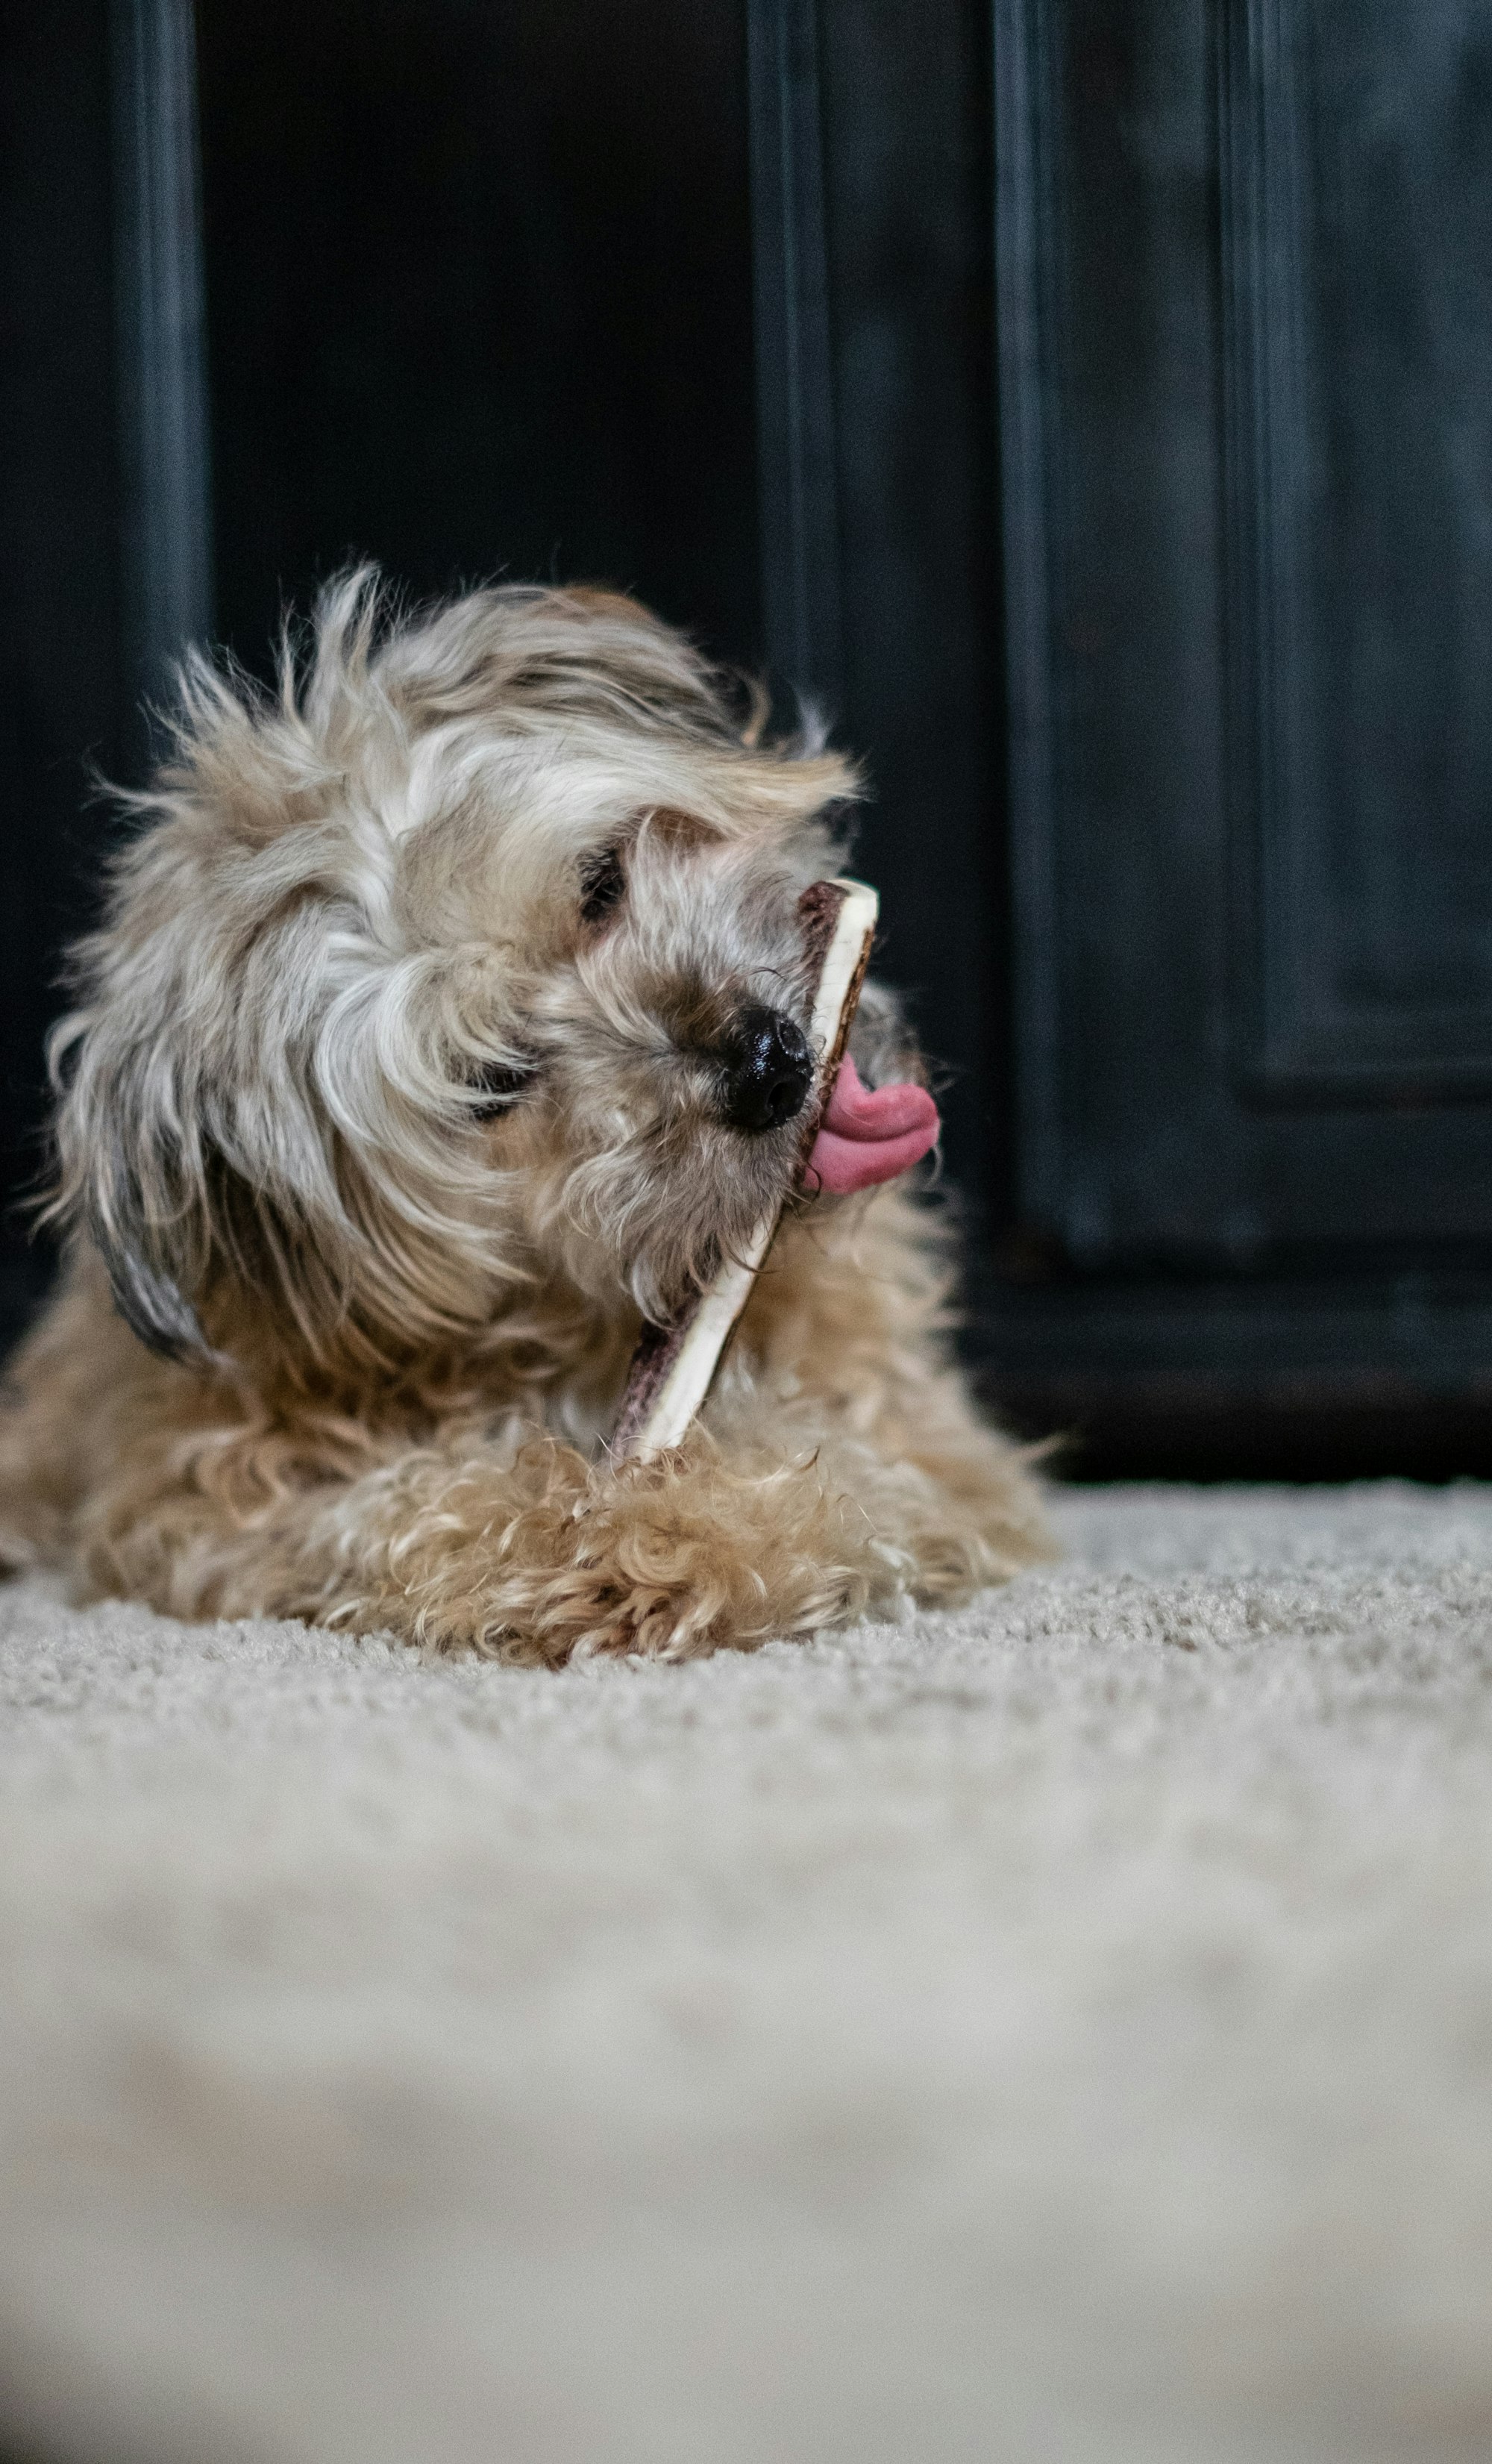 Dog shewing on his favorite bone on the rug